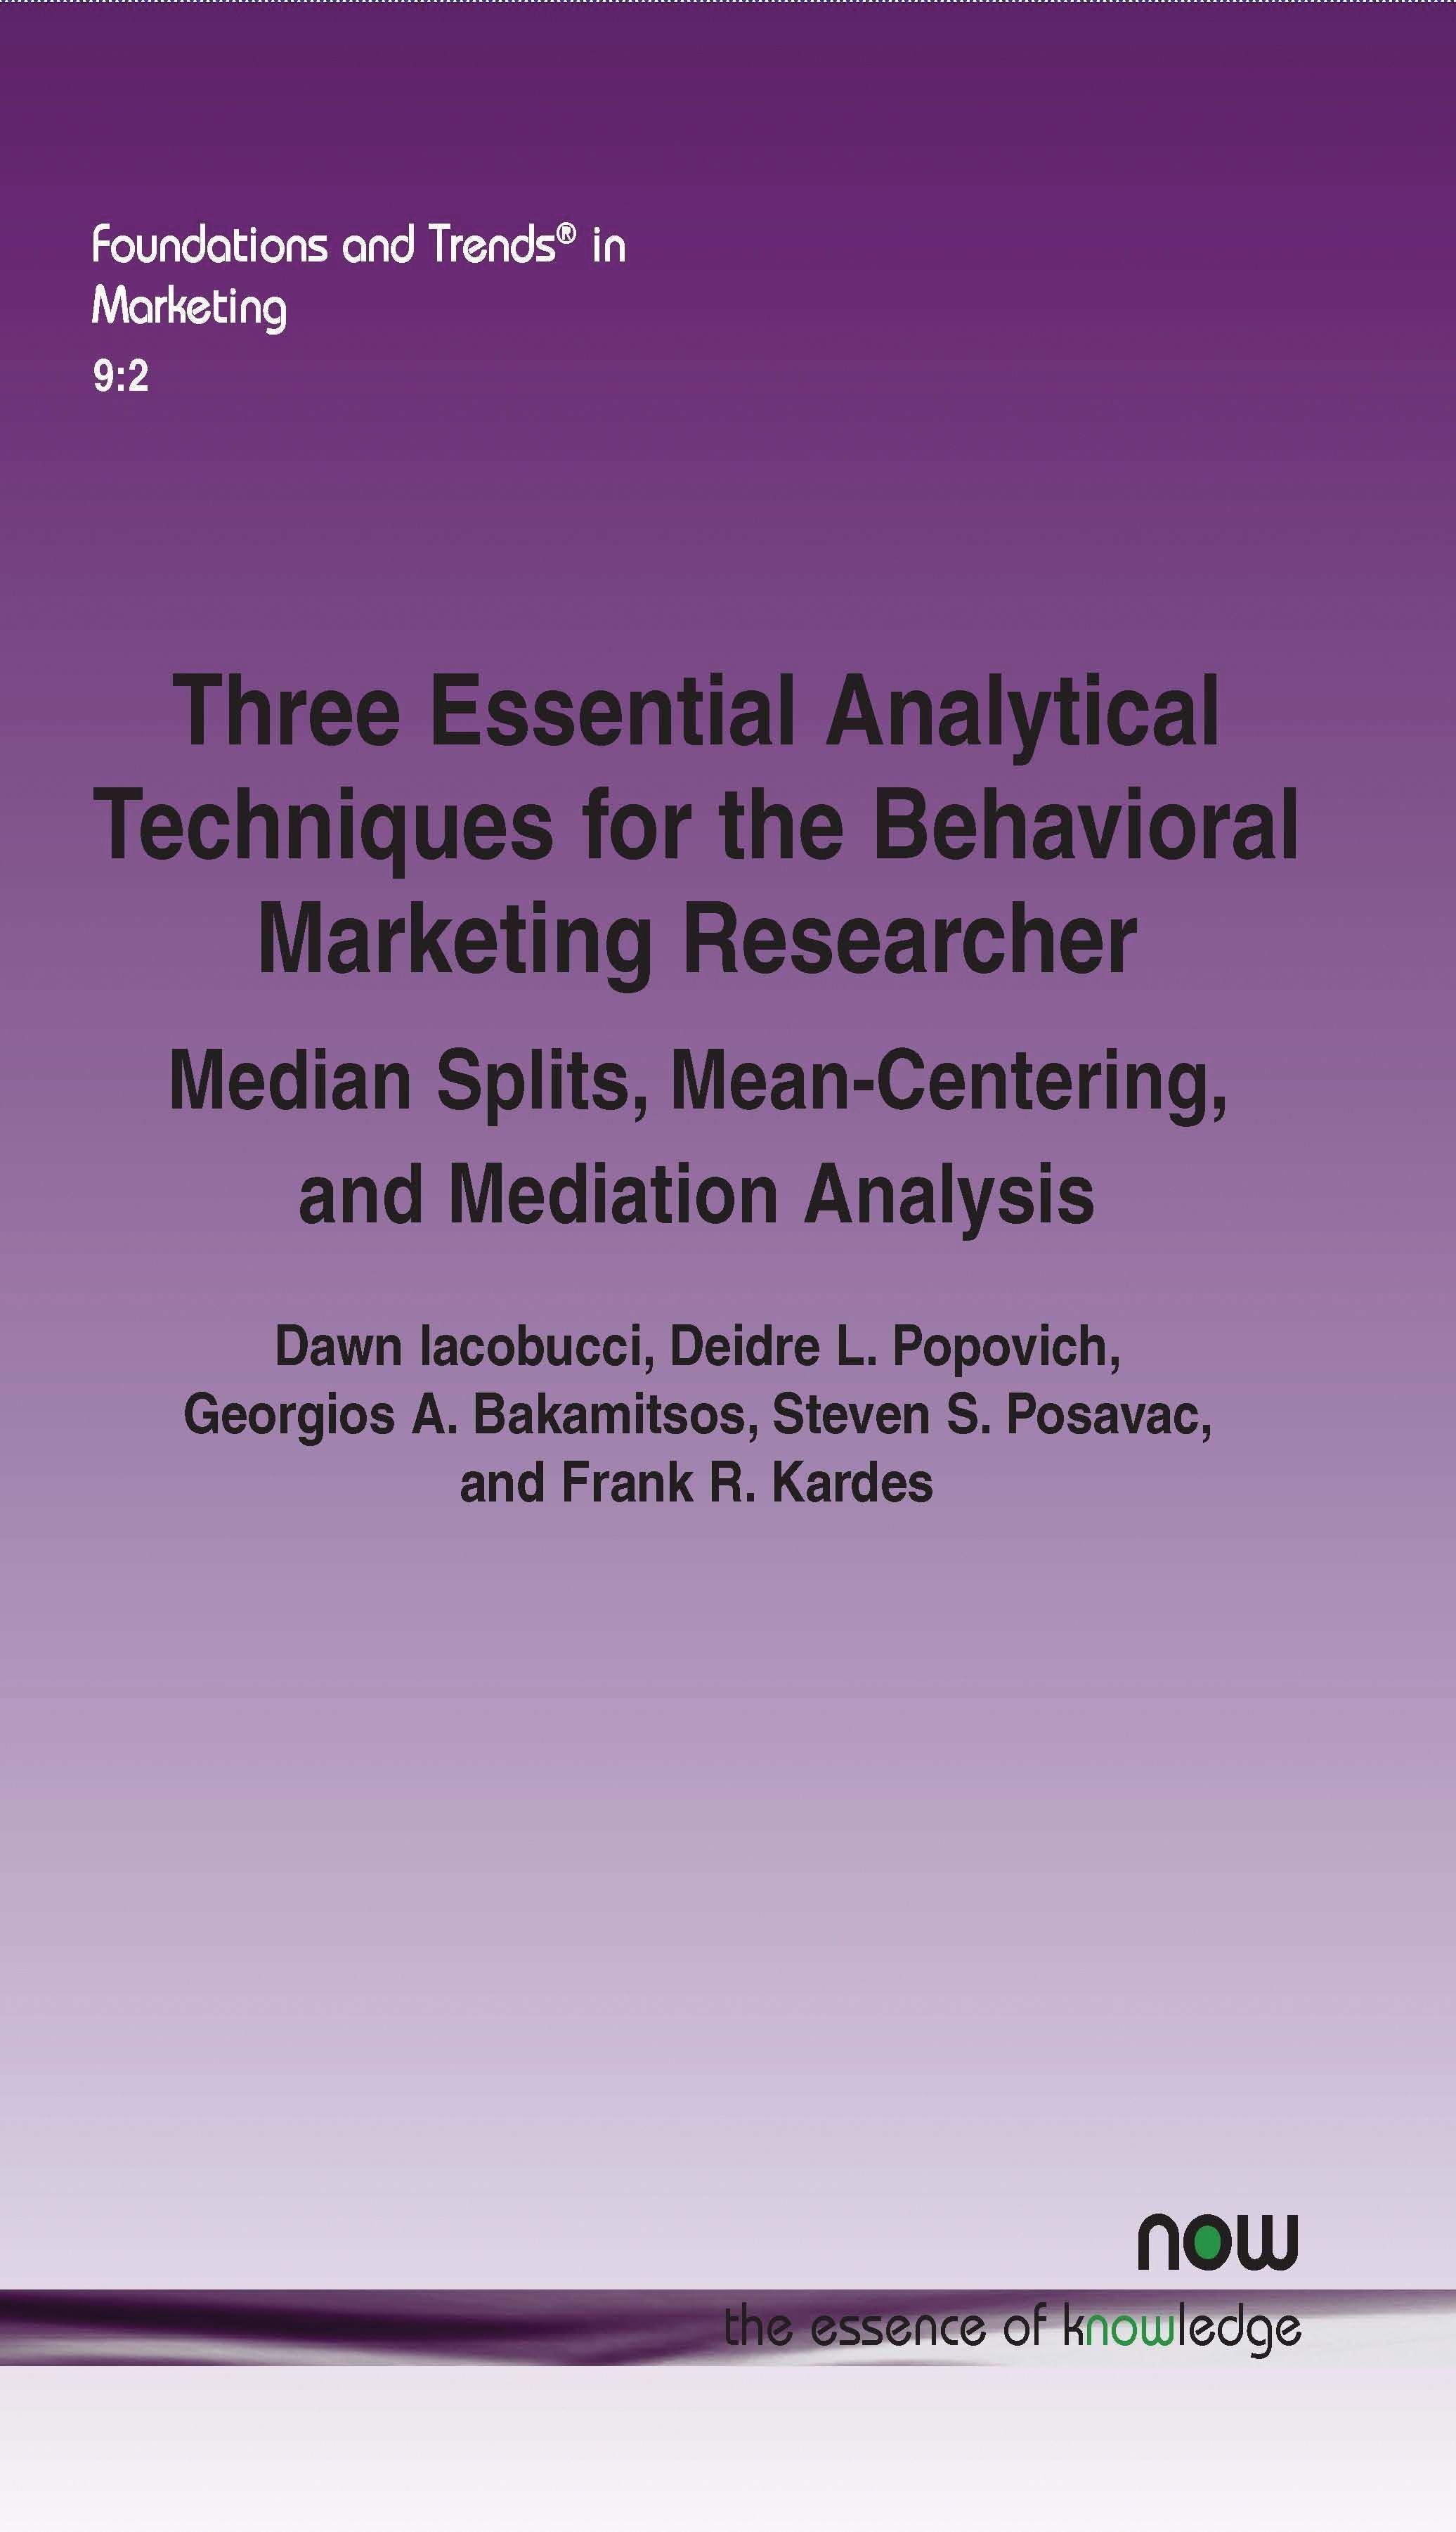 Three Essential Analytical Techniques for the Behavioral Marketing Researcher